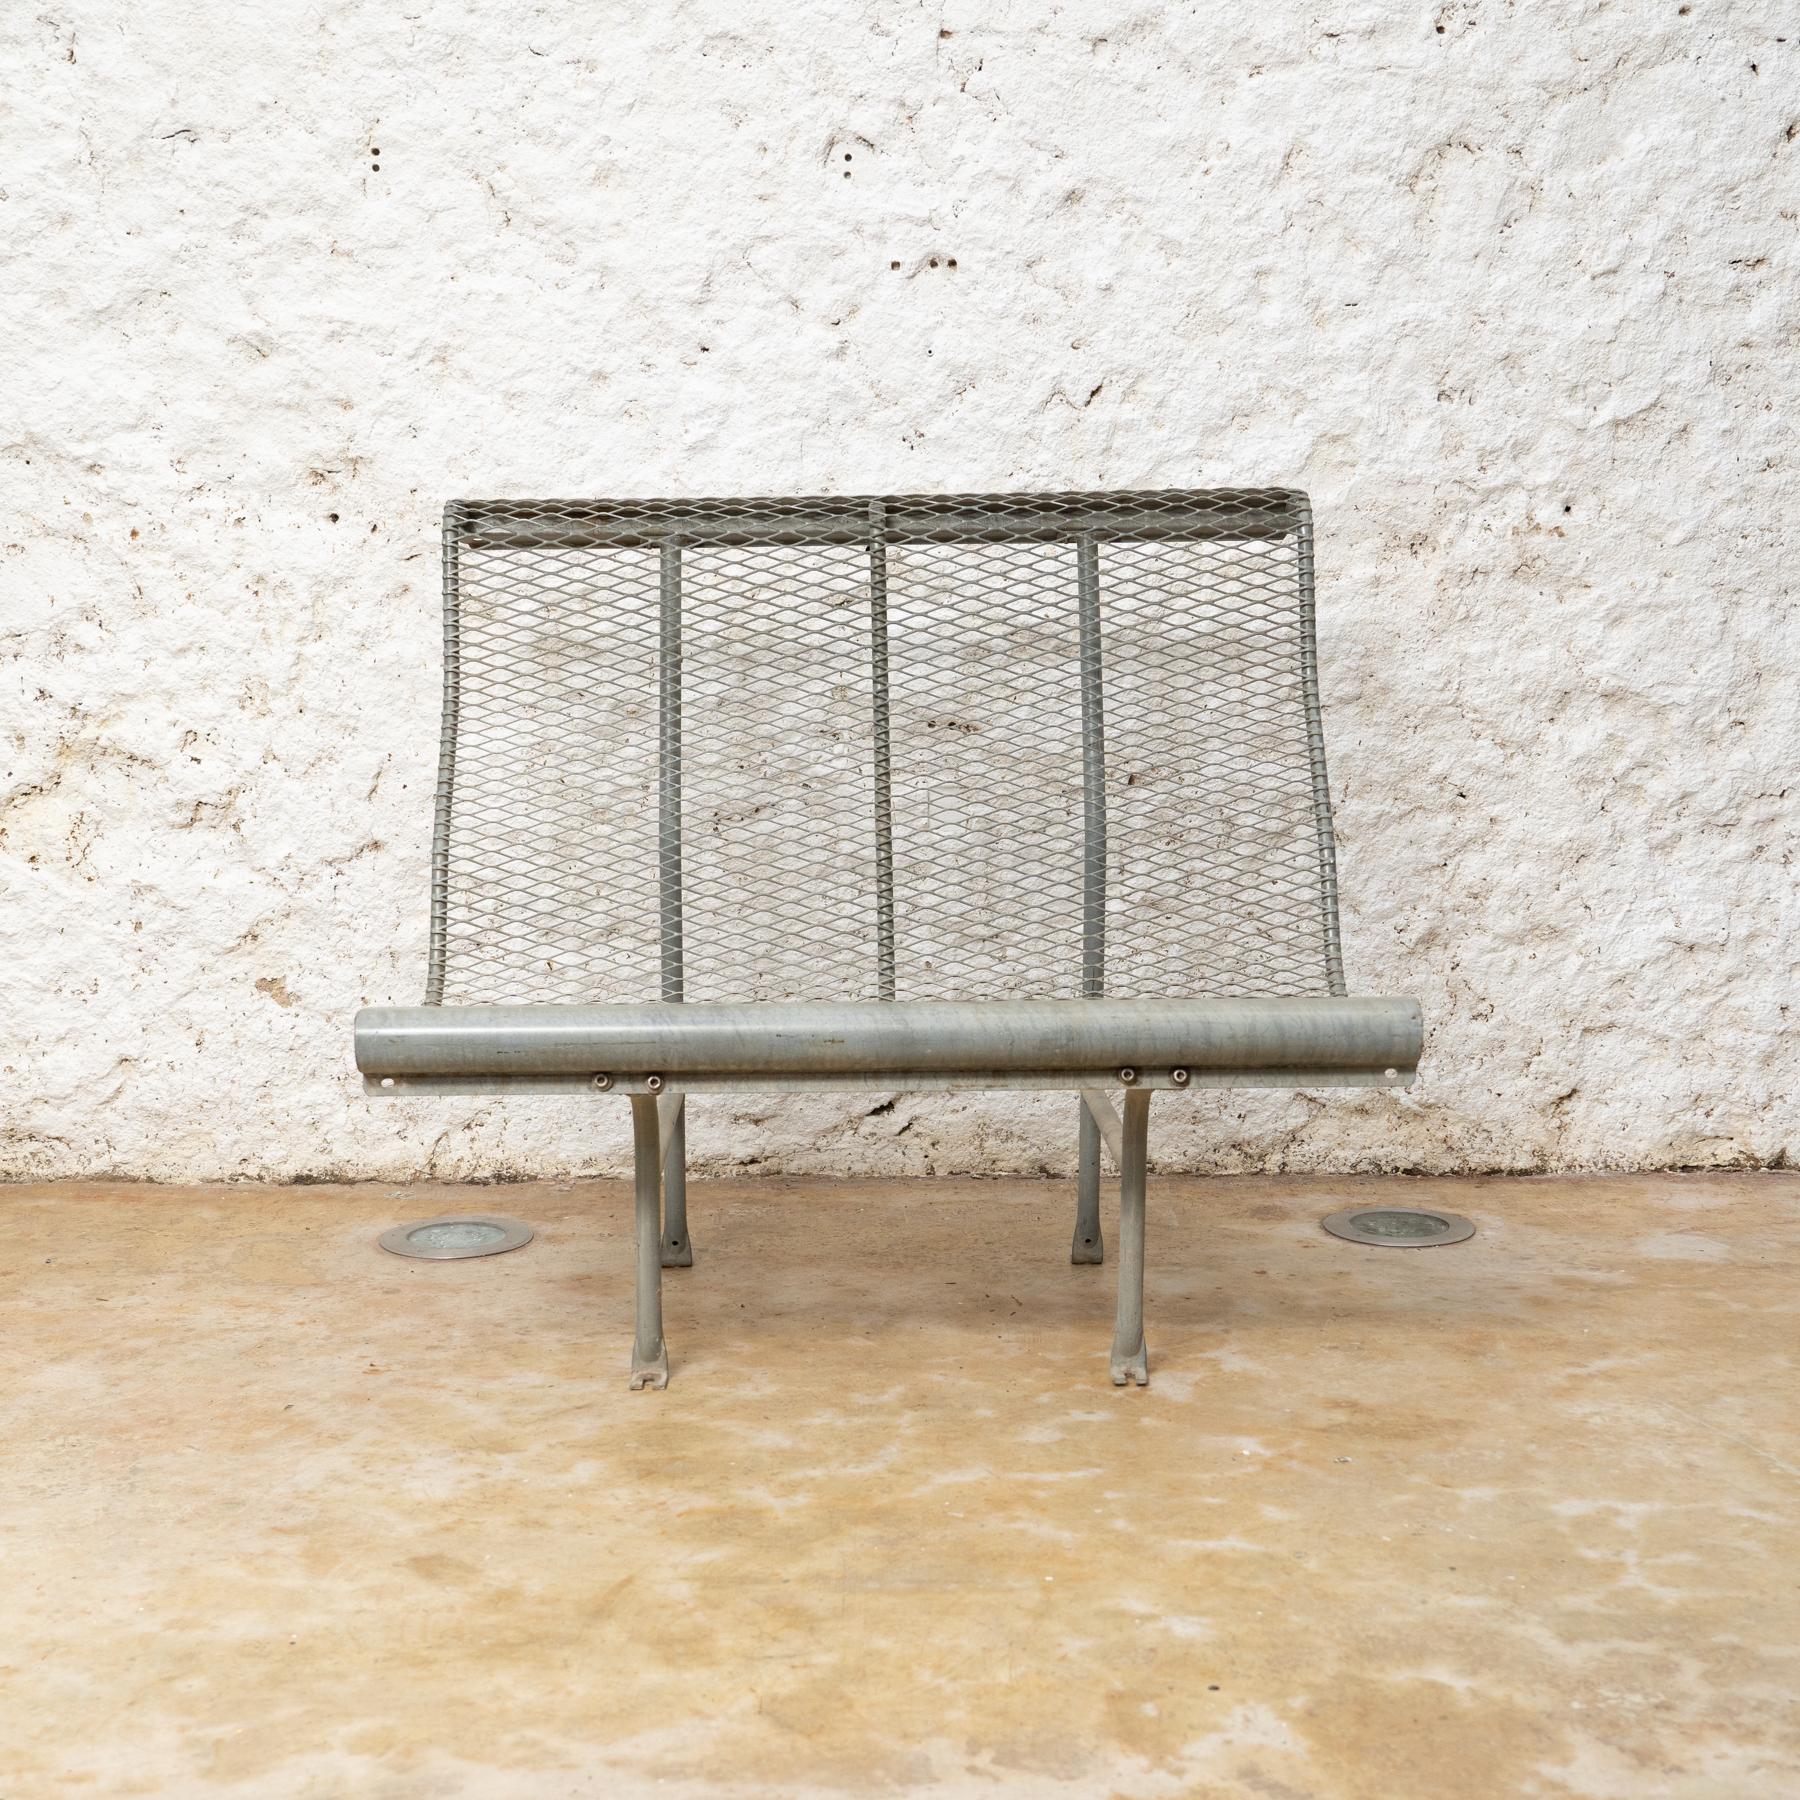 Introducing the Metal Bench Version “Perforano” by Oscar Tusquets for BD Barcelona, circa 1980, a distinctive piece that seamlessly merges form and function. Crafted entirely in metal, this bench is not confined to interior spaces alone; its robust